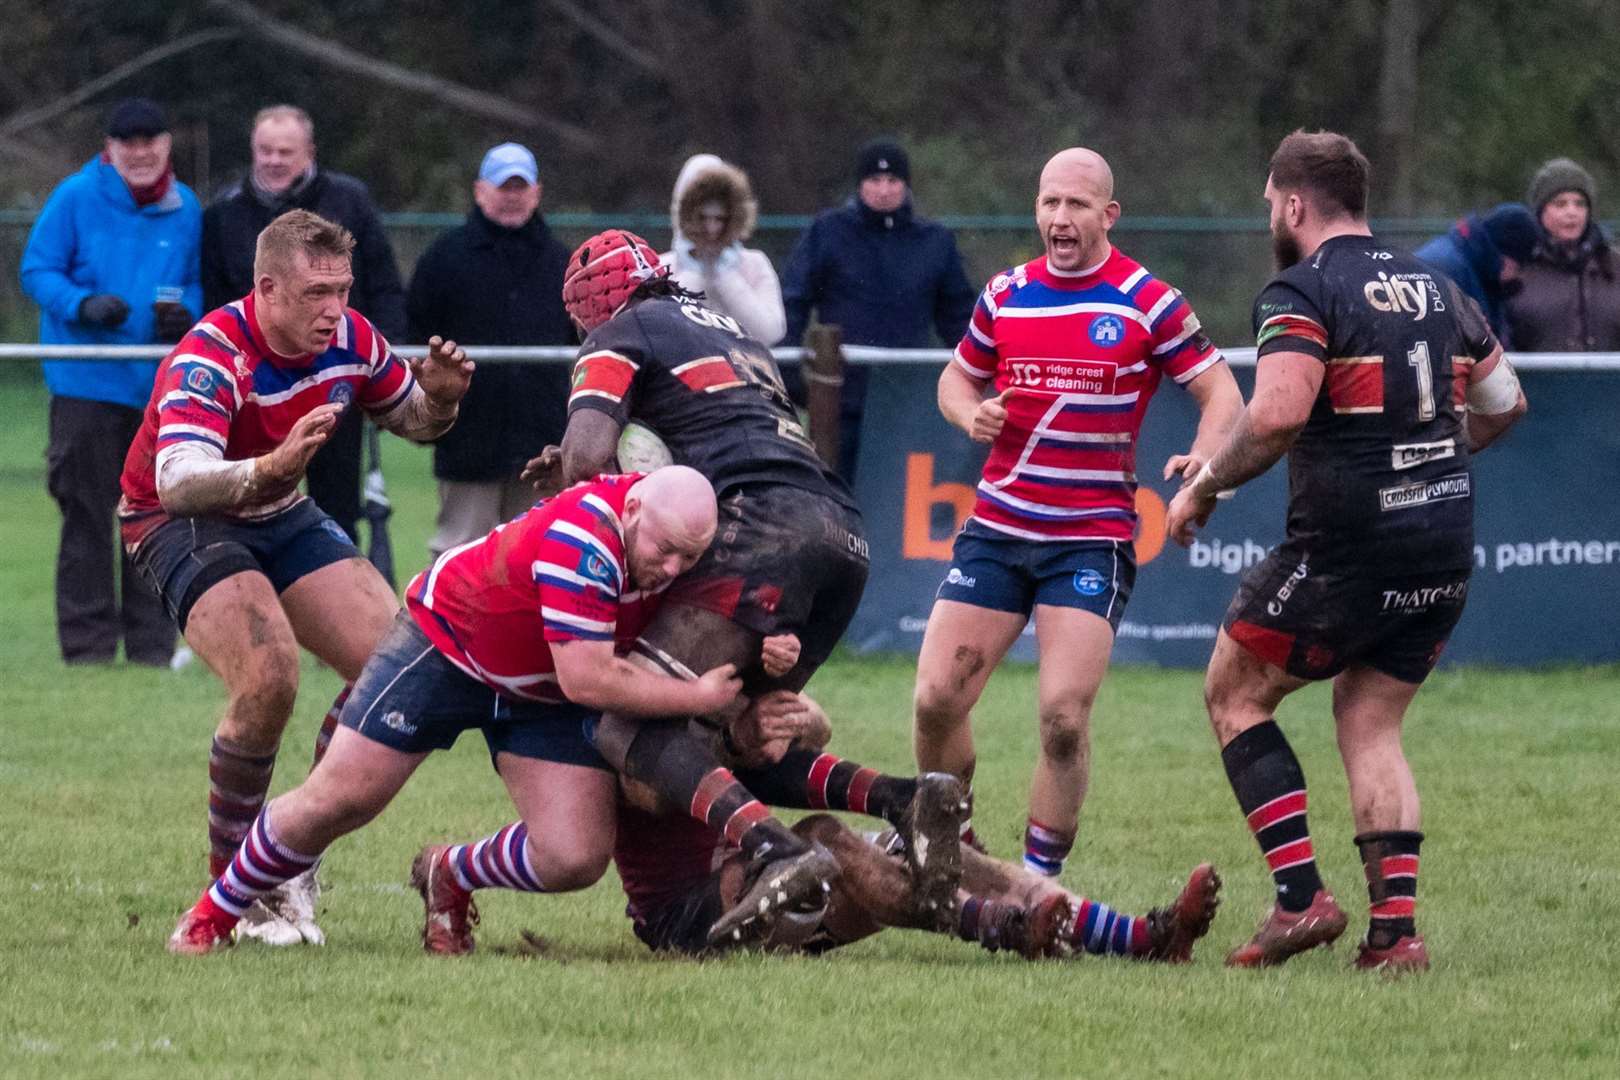 The win was only Tonbridge Juddians' second of the National League 1 season